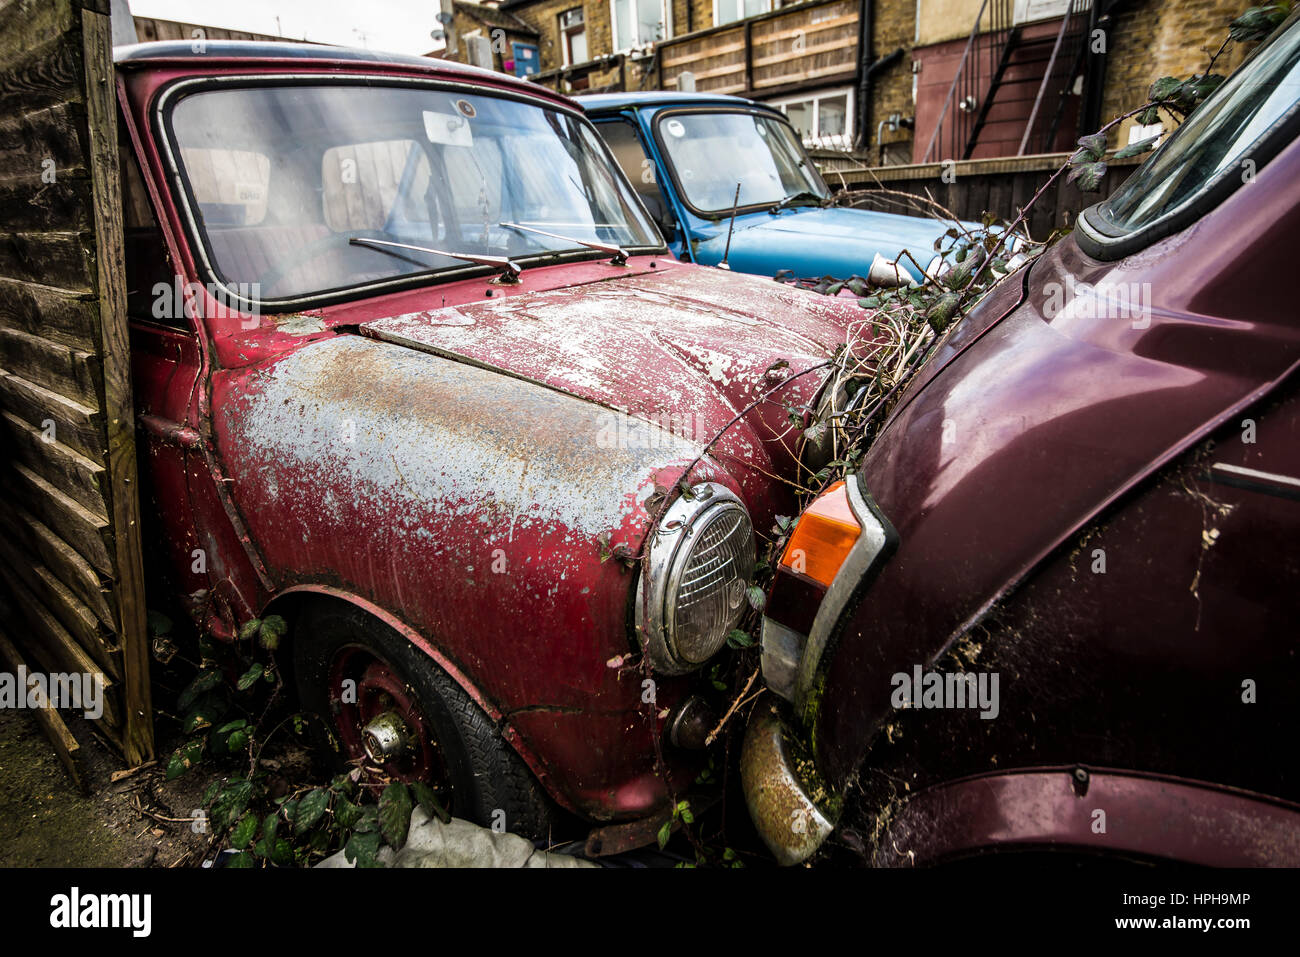 A group of four abandoned British Leyland Minis left to deteriorate on an overgrown parking lot. Mini car, cars Stock Photo